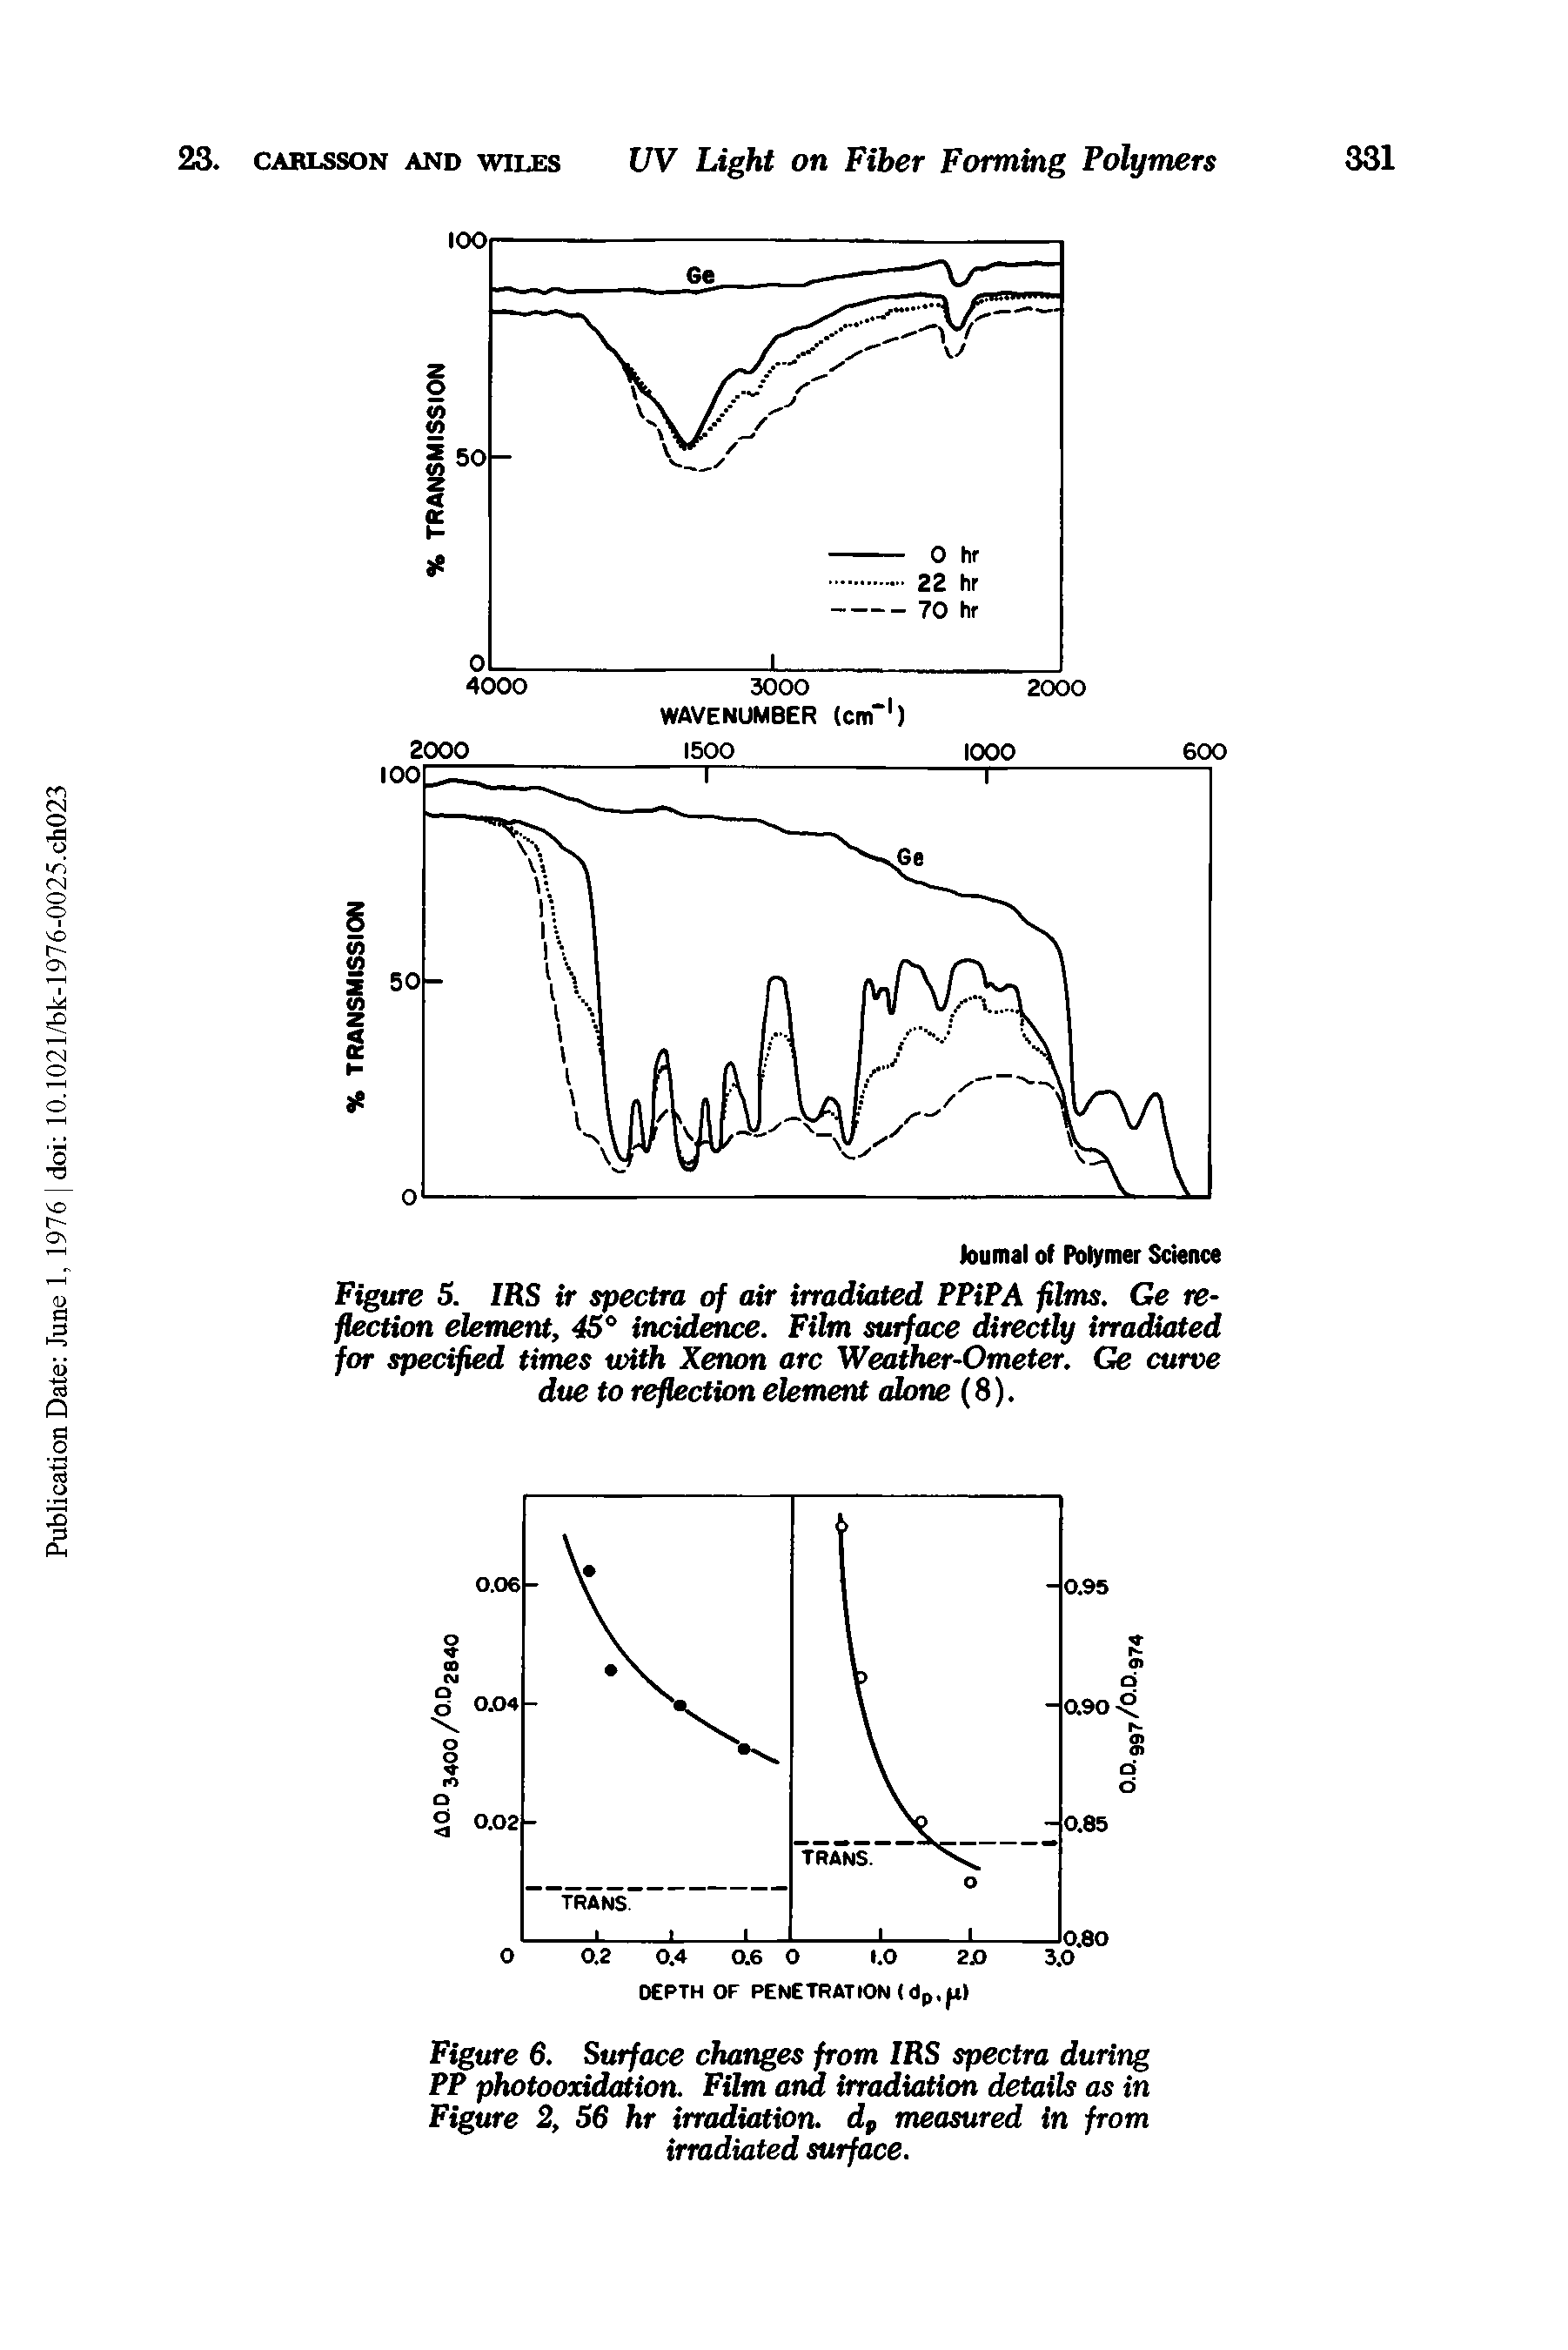 Figure 5. IRS ir spectra of air irradiated PPiPA films. Ge reflection element, 45 incidence. Film surface directly irradiated for specified times with Xenon arc Weather-Ometer. Ge curve due to reflection element alone (8).